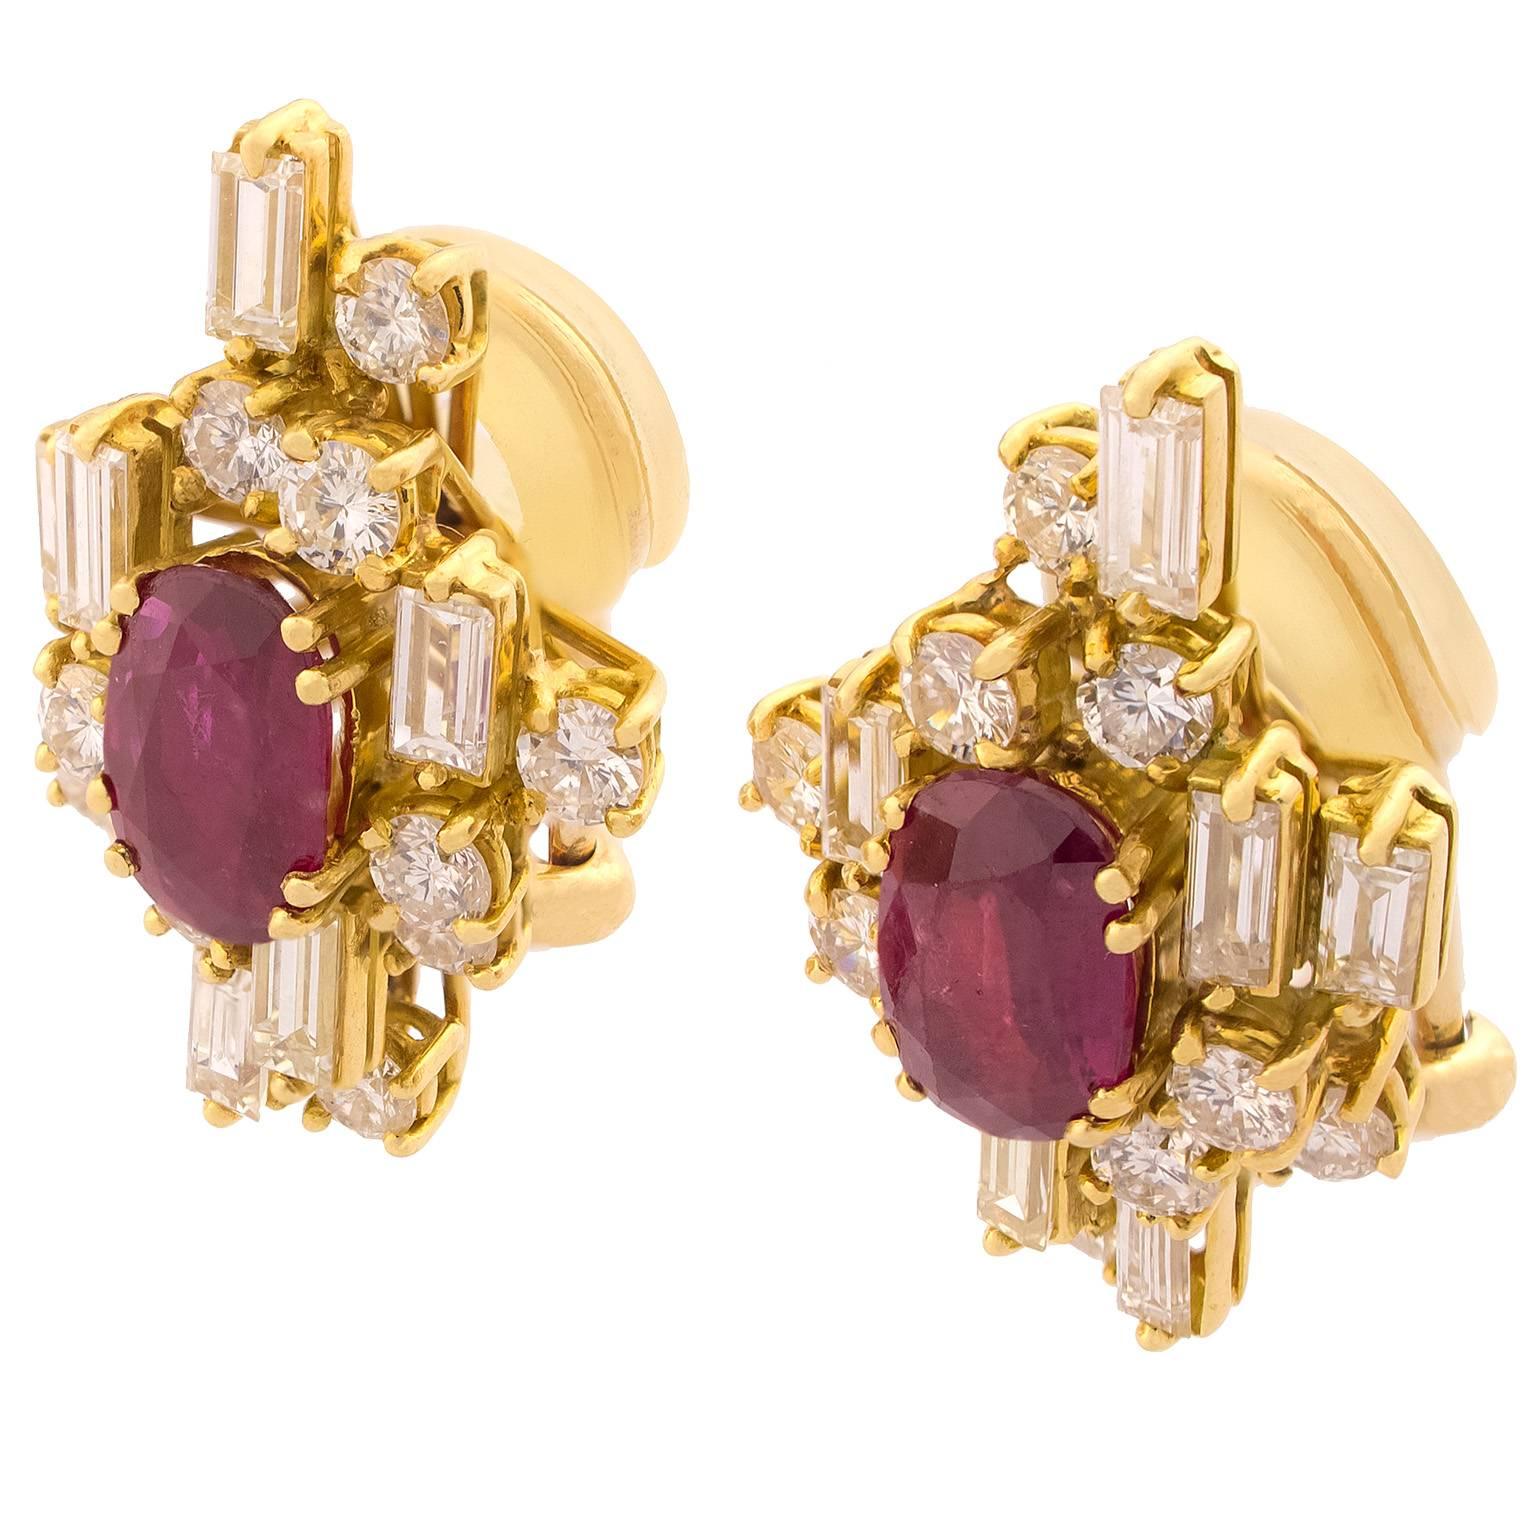 Yellow gold earrings centered by two oval cut rubies with a total weight of 1.15 carats, surrounded by 32 baguette and round brilliant cut diamonds, totalling 1.80 carats.